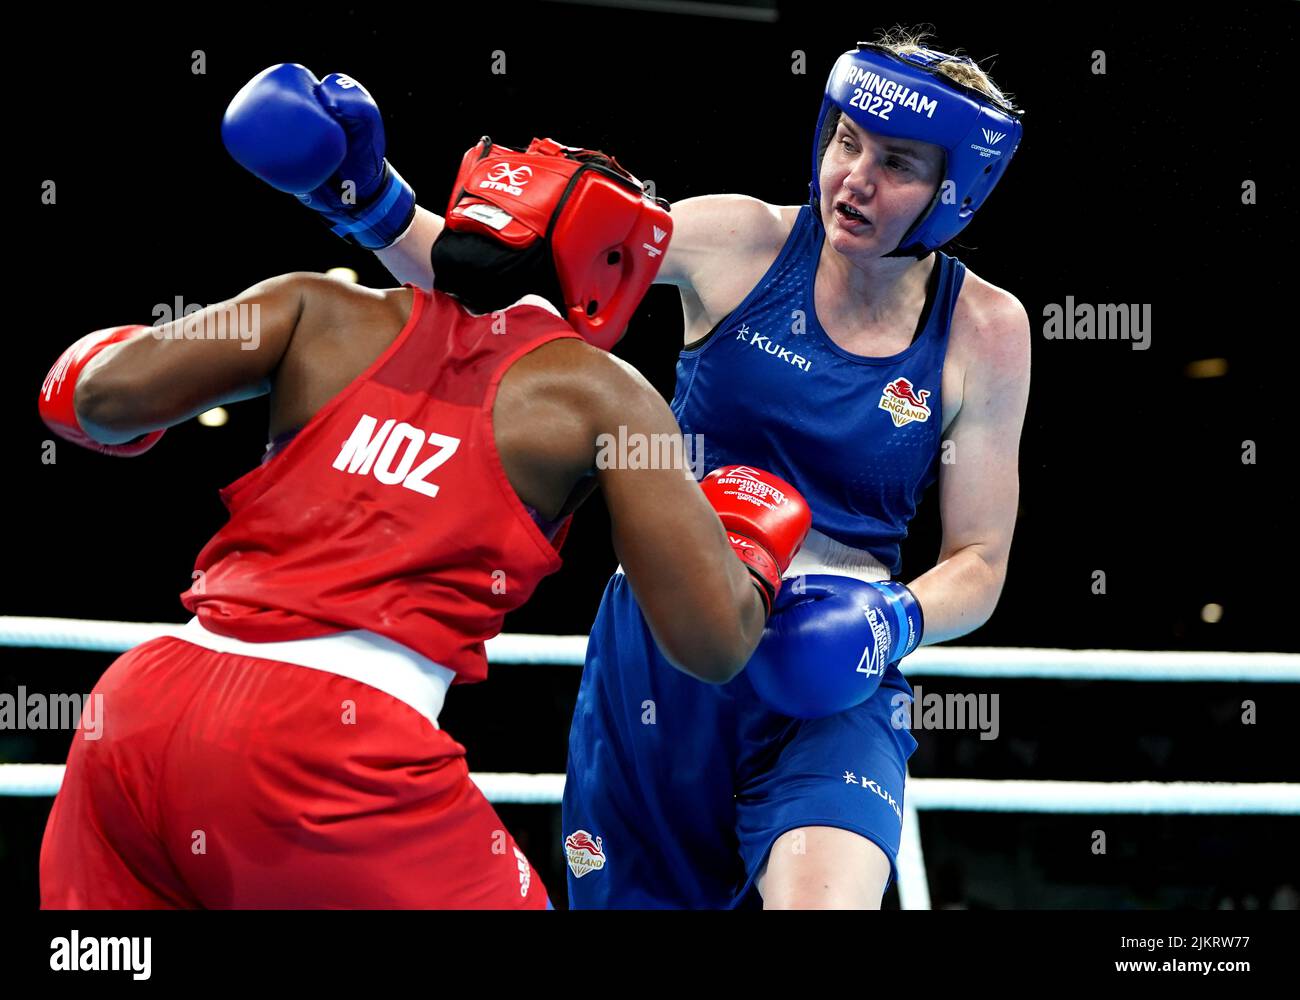 Mozambique's Rady Gramane on her way to victory against England's Kerry Davis (right) during the Women's Over 70kg-75kg (Middleweight) - Quarter-Final 1 at The NEC on day six of the 2022 Commonwealth Games in Birmingham. Picture date: Wednesday August 3, 2022. Stock Photo